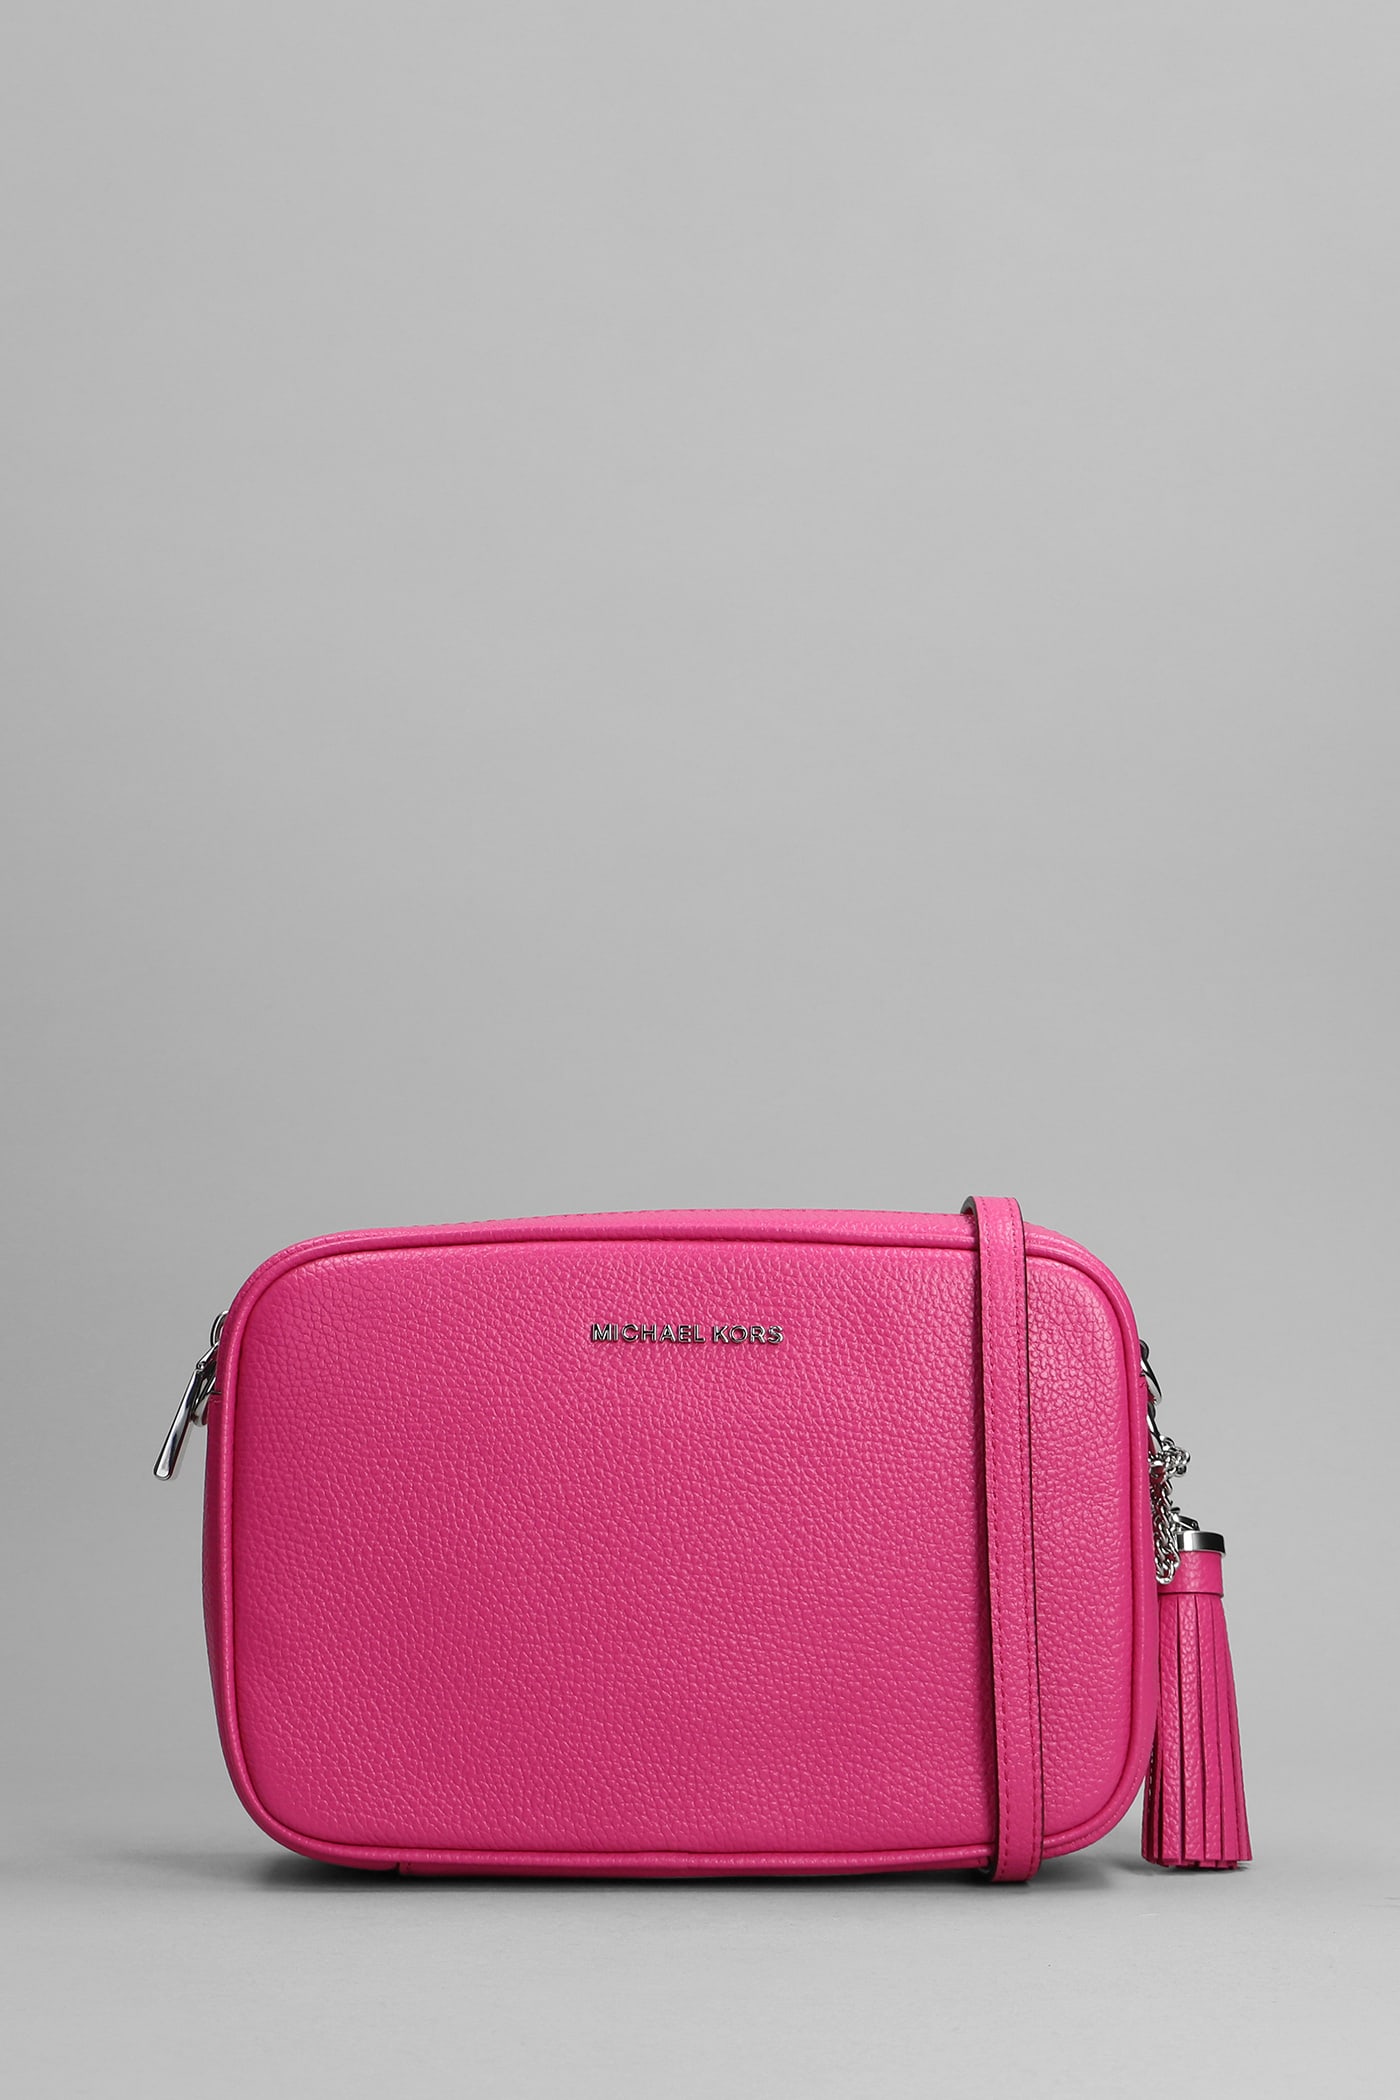 Michael Kors Ginny Shoulder Bag In Fuxia Leather